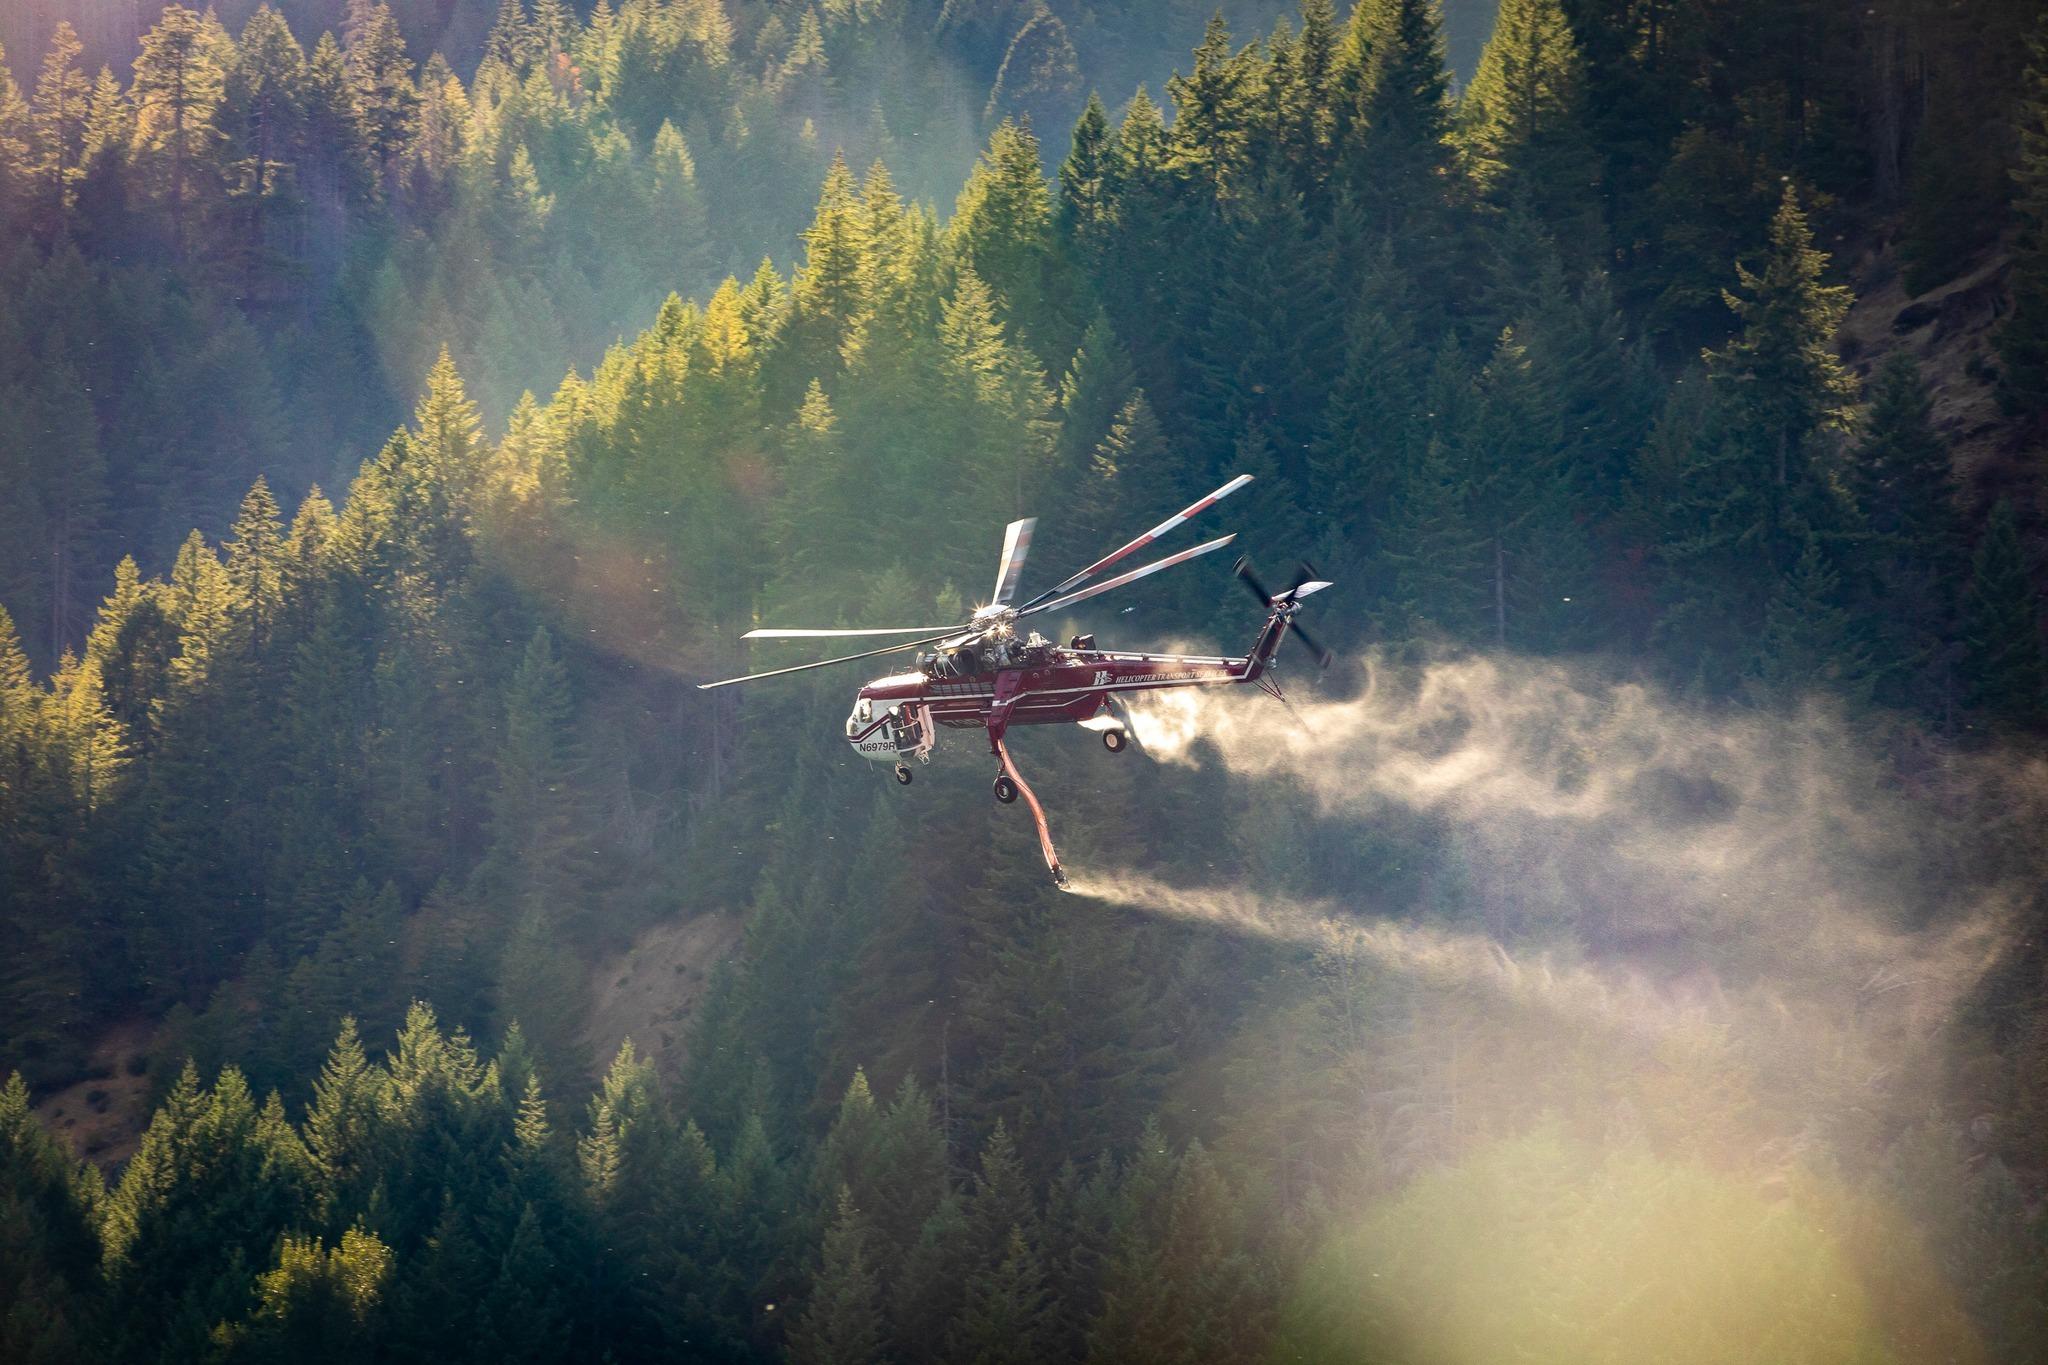 This is an image of helicopter dropping water alongside the fire's edge